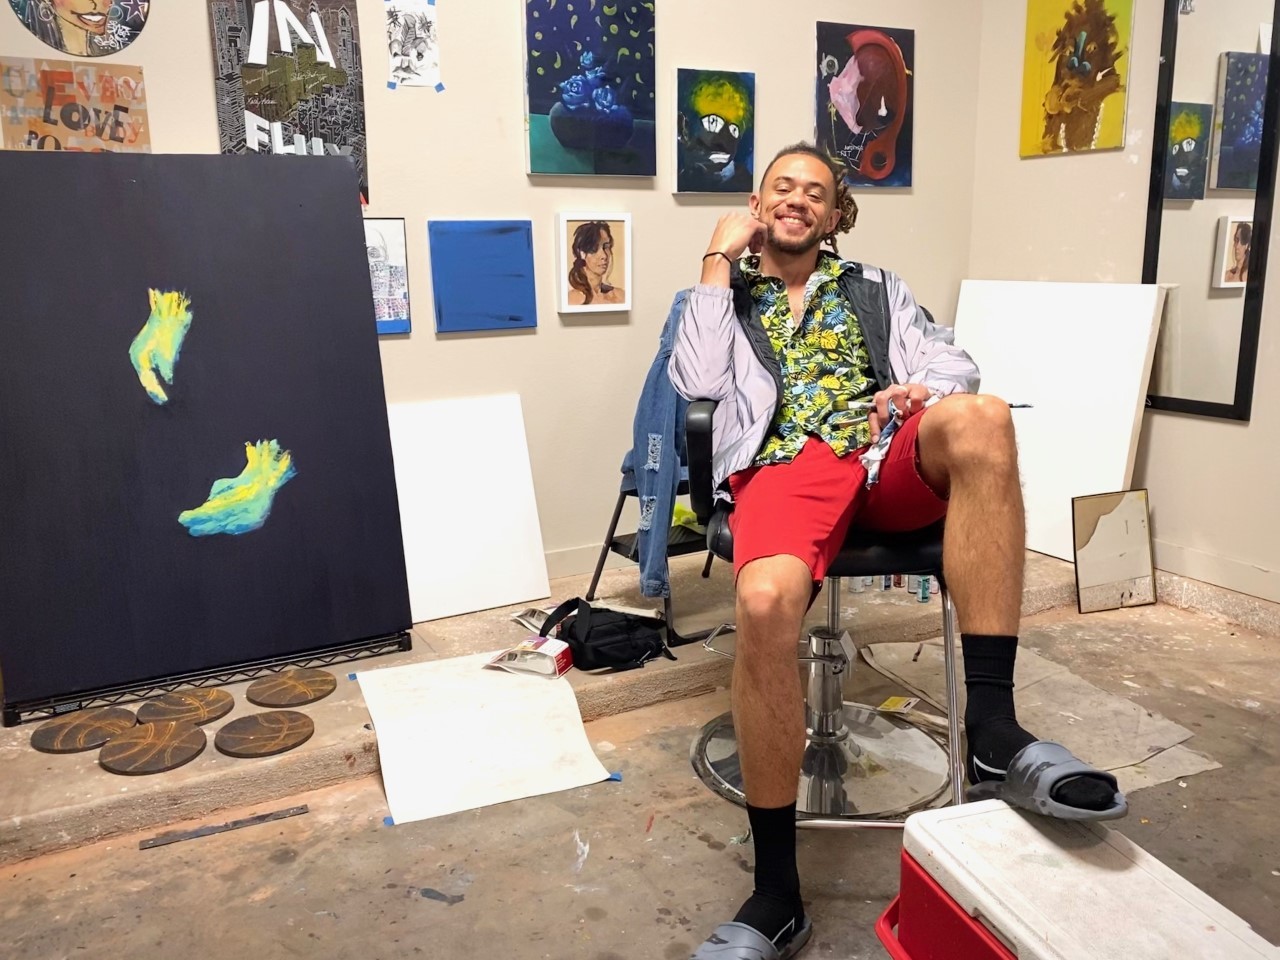 A smiling figure in colorful clothing sits back in a chair in an art studio with paintings on the wall